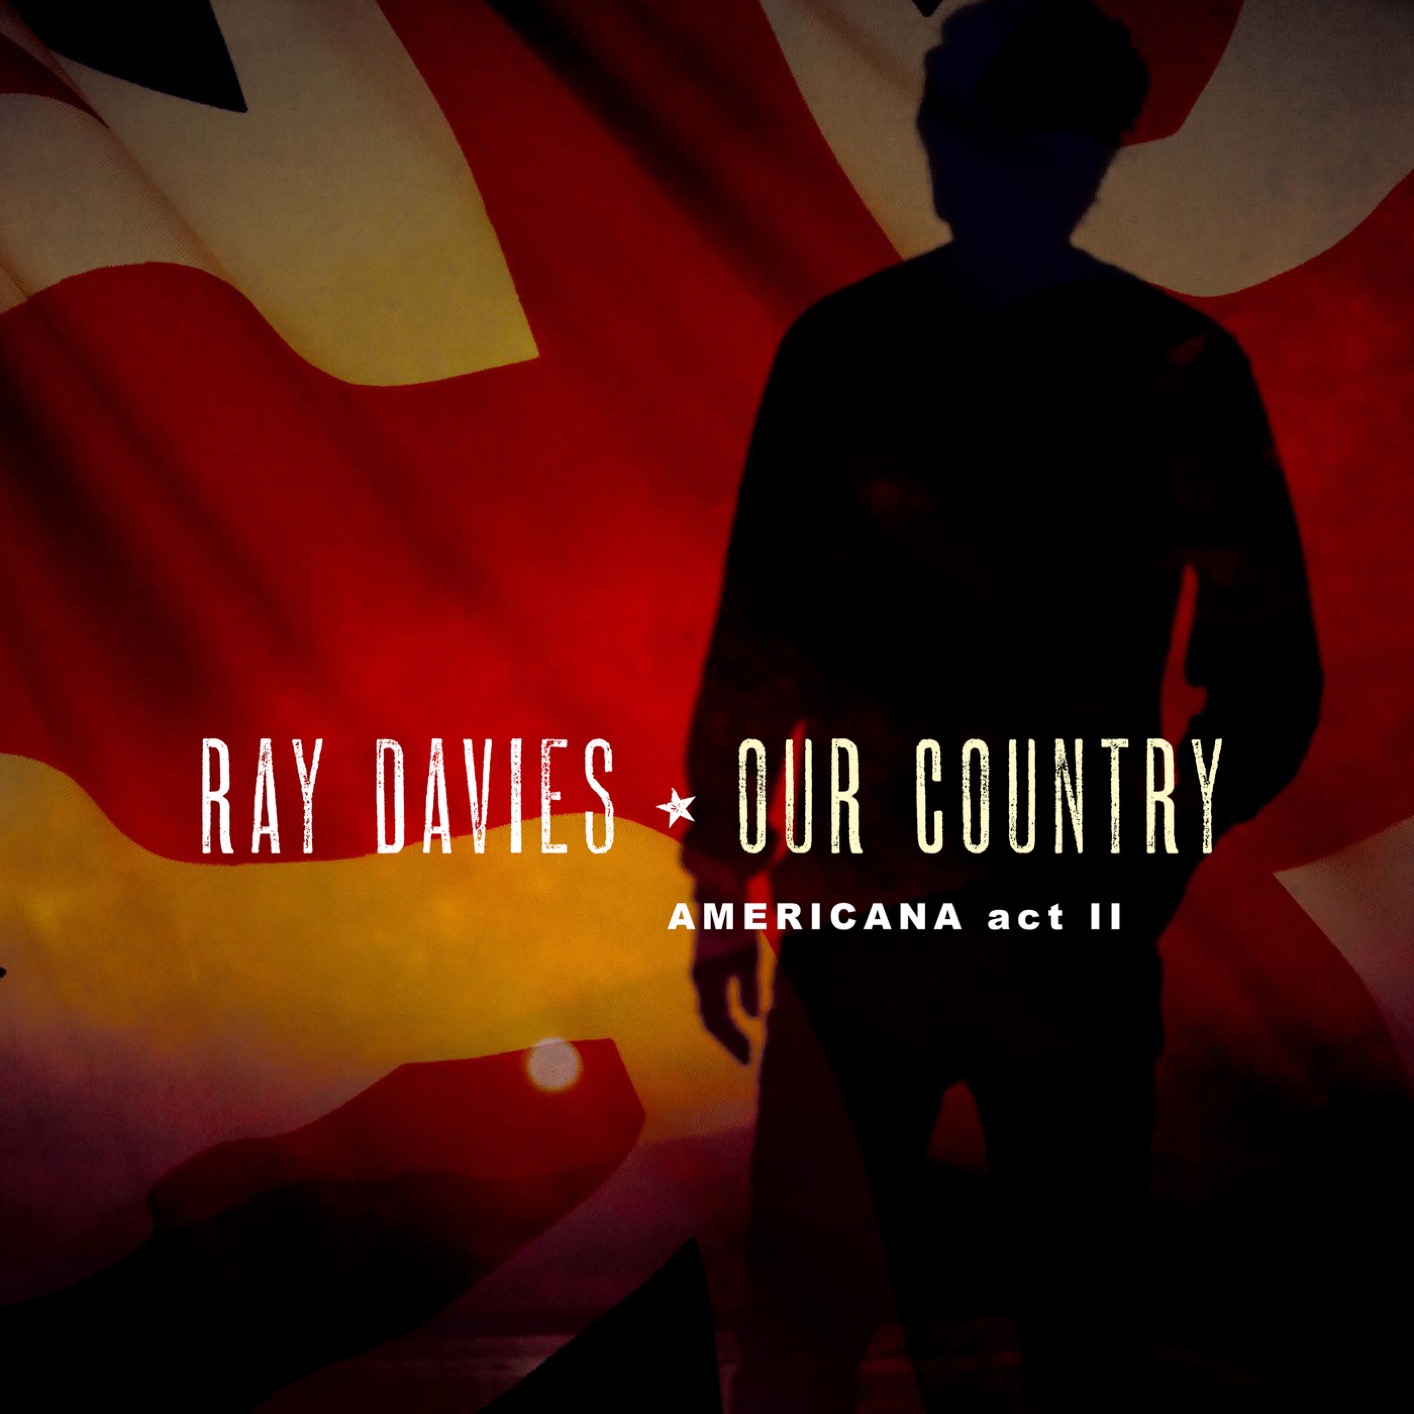 Ray Davies - Our Country: Americana Act 2 (2018) [FLAC 24bit/96kHz]